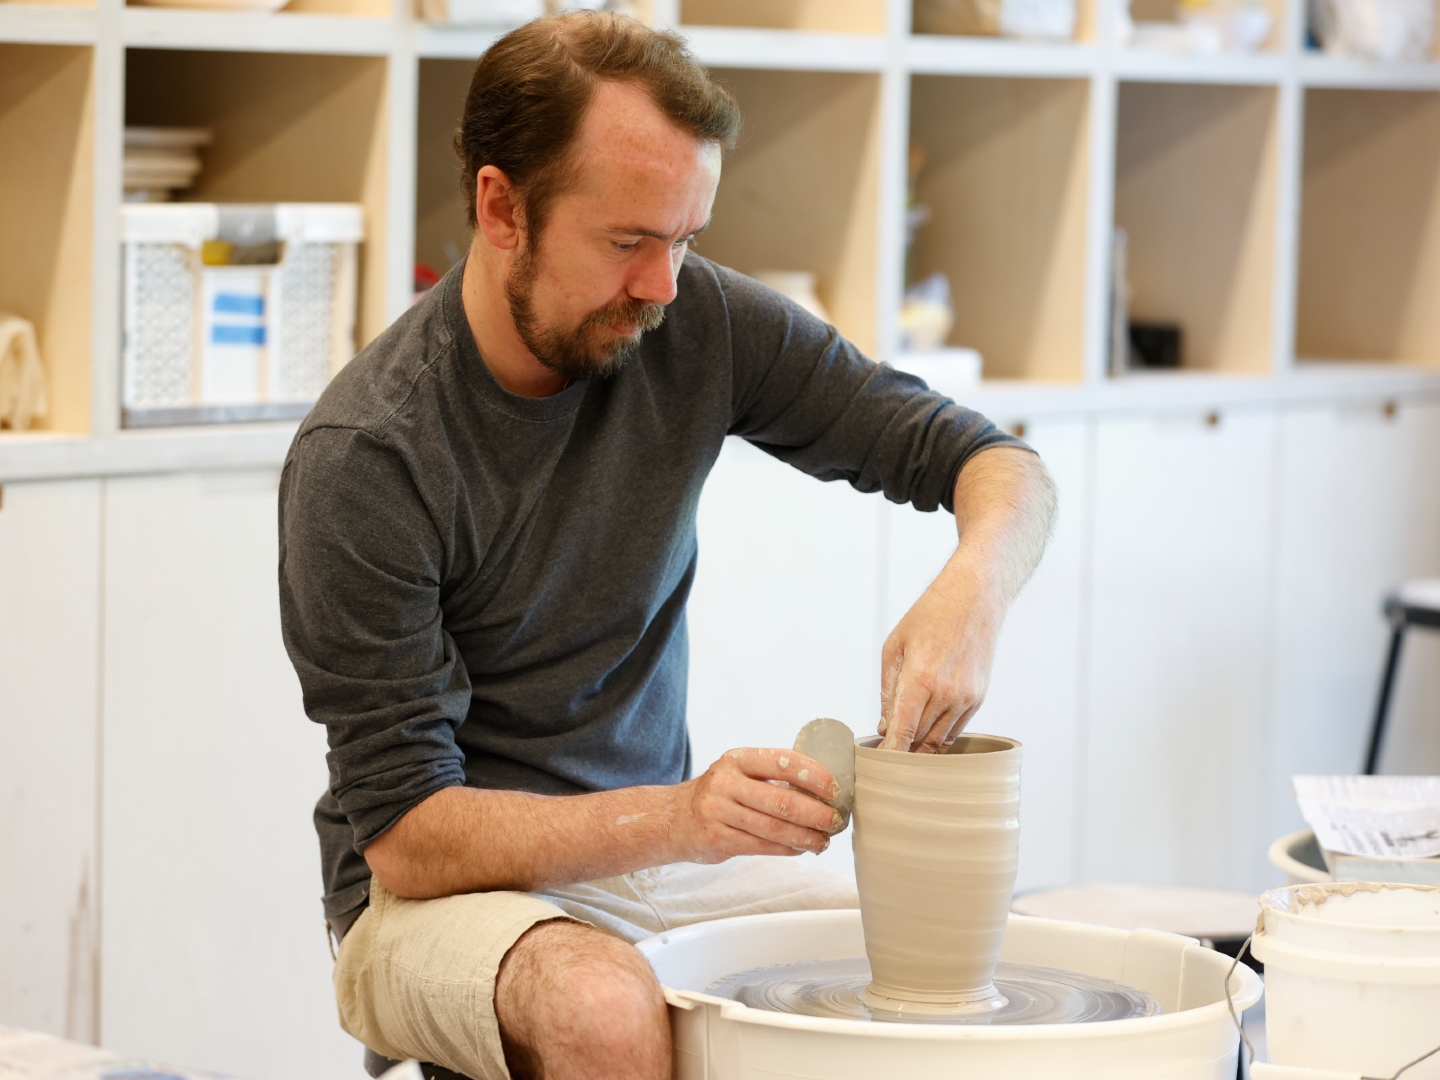 Photo of a man making a vase on a pottery wheel in an art studio.